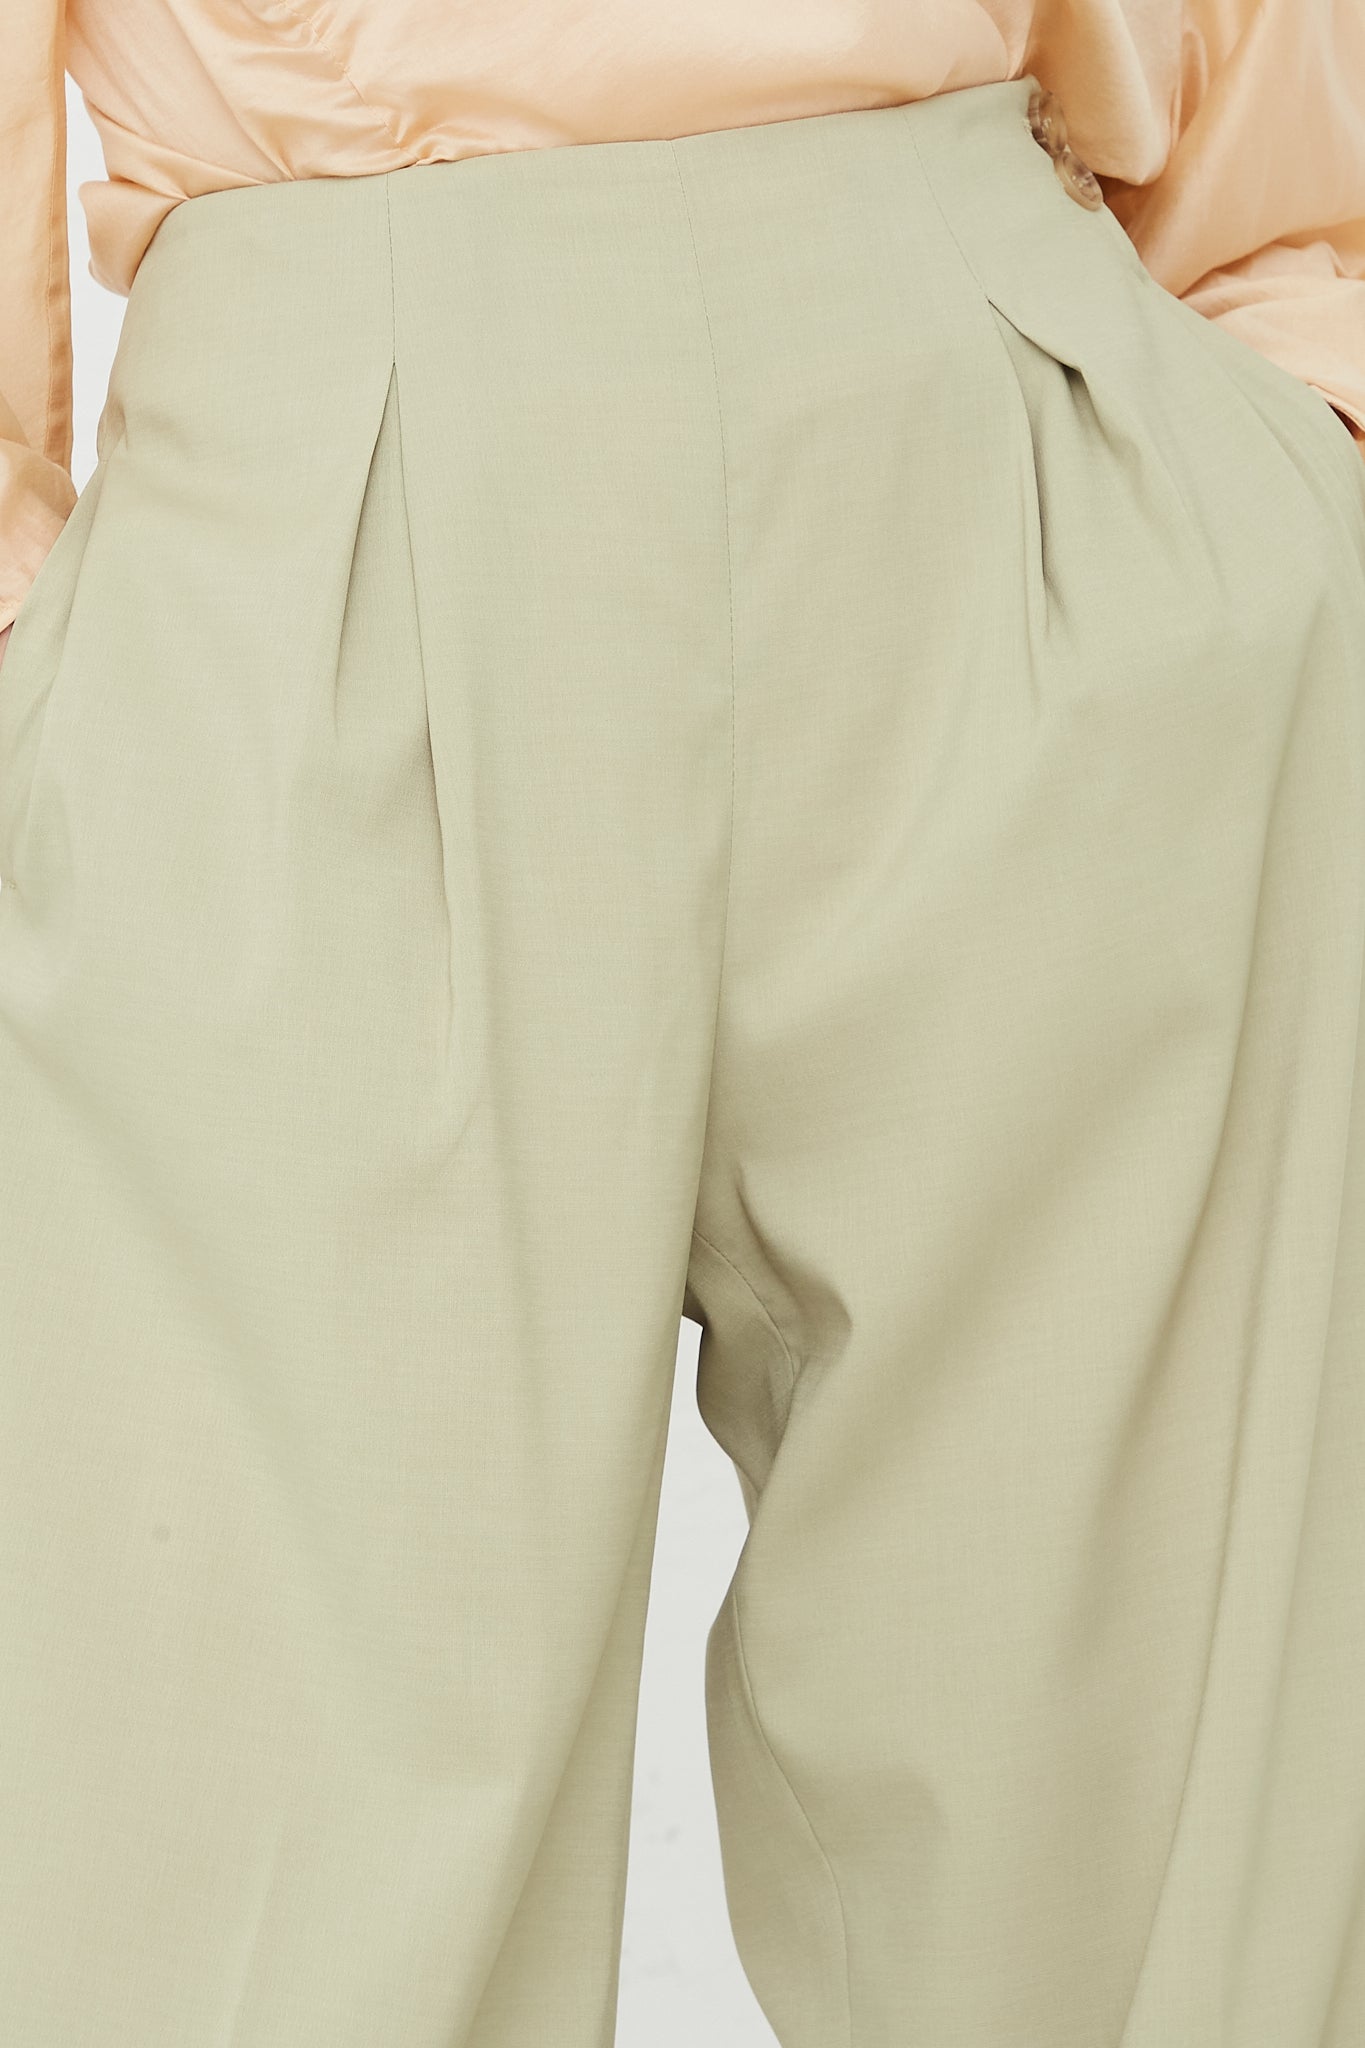 The front view of a woman in Rejina Pyo's Reine Trouser in Sage made from a polyester silk blend fabric. Up close view.